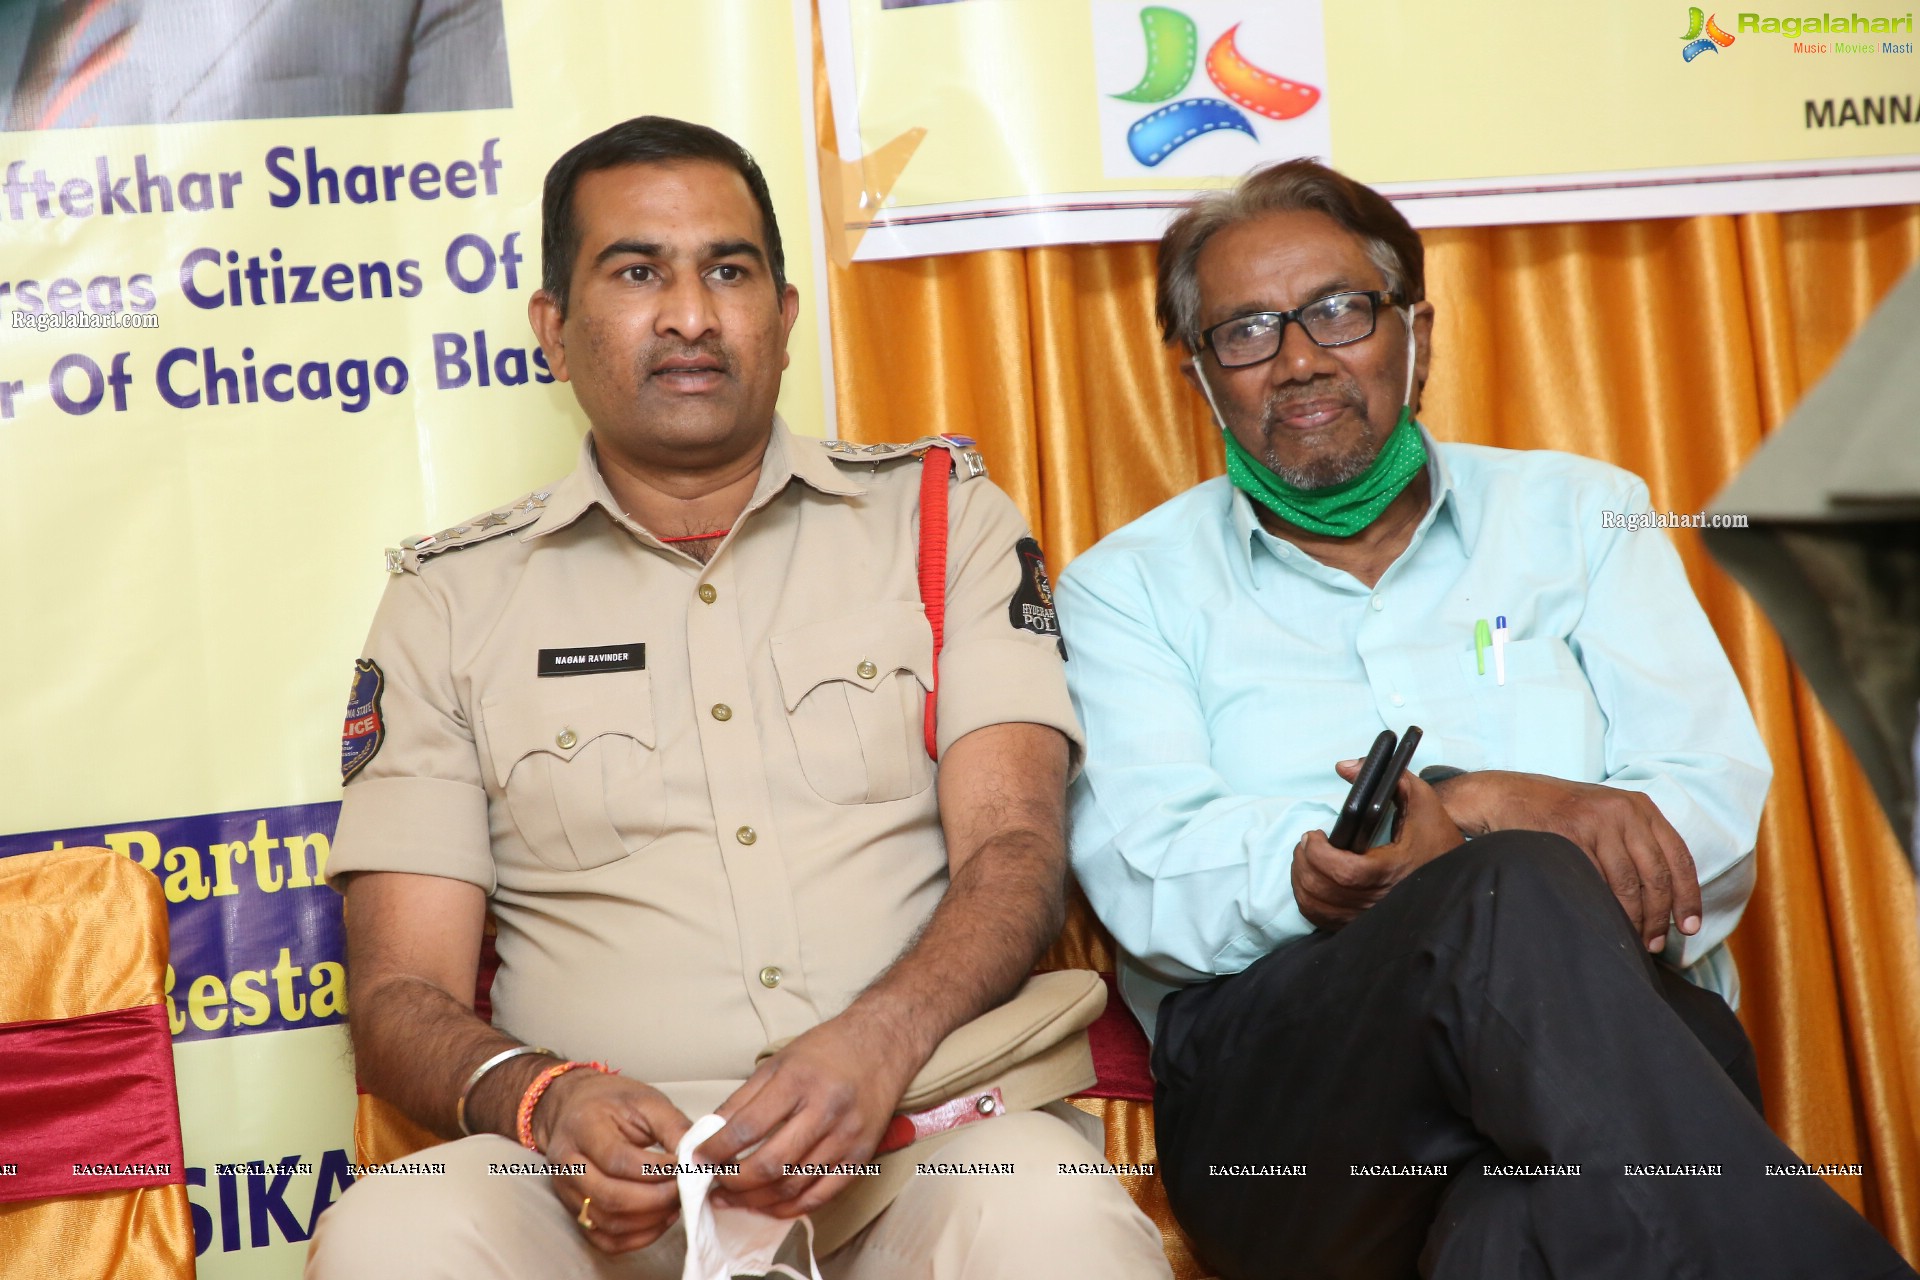 Felicitation of City Protectors Covid-19 Warrior - Law & Order & Traffic Police Officers